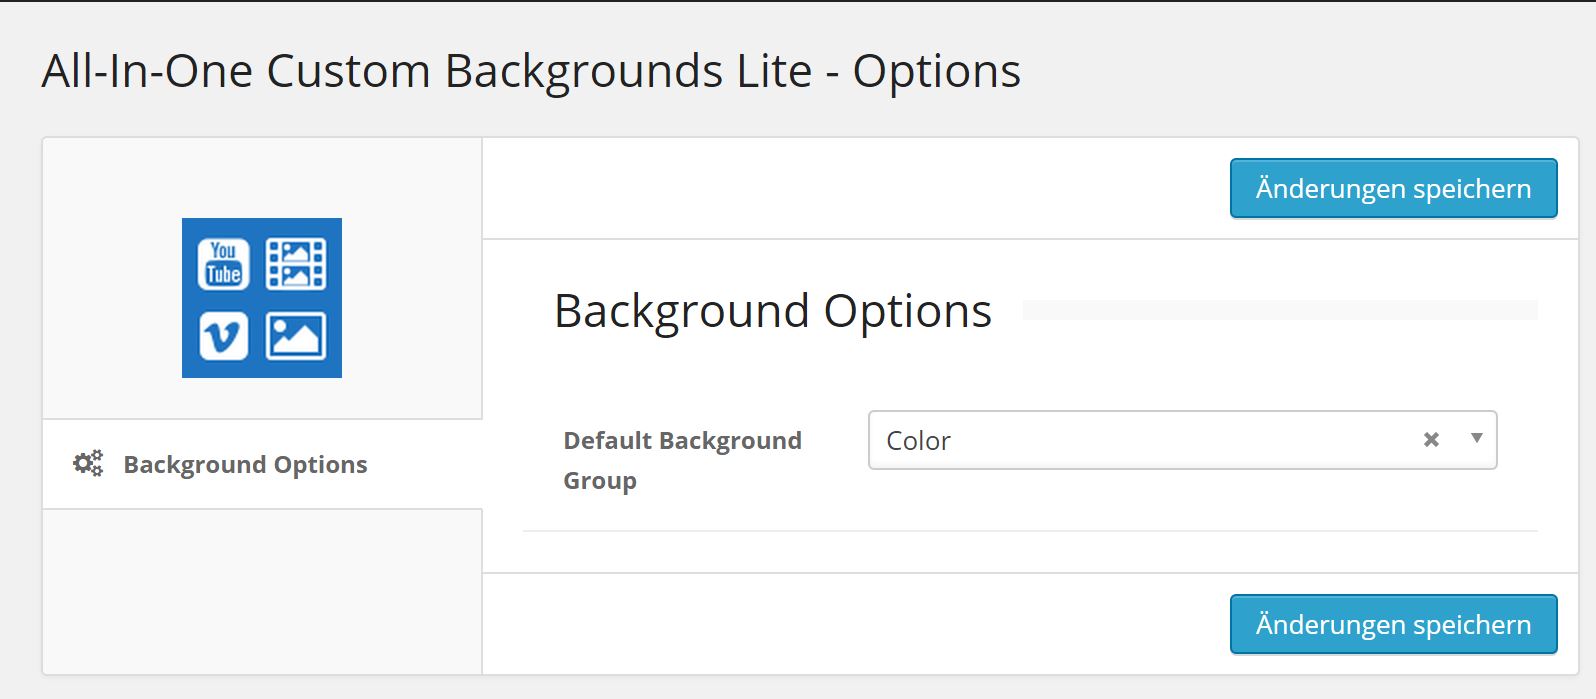 Options panel to select default background